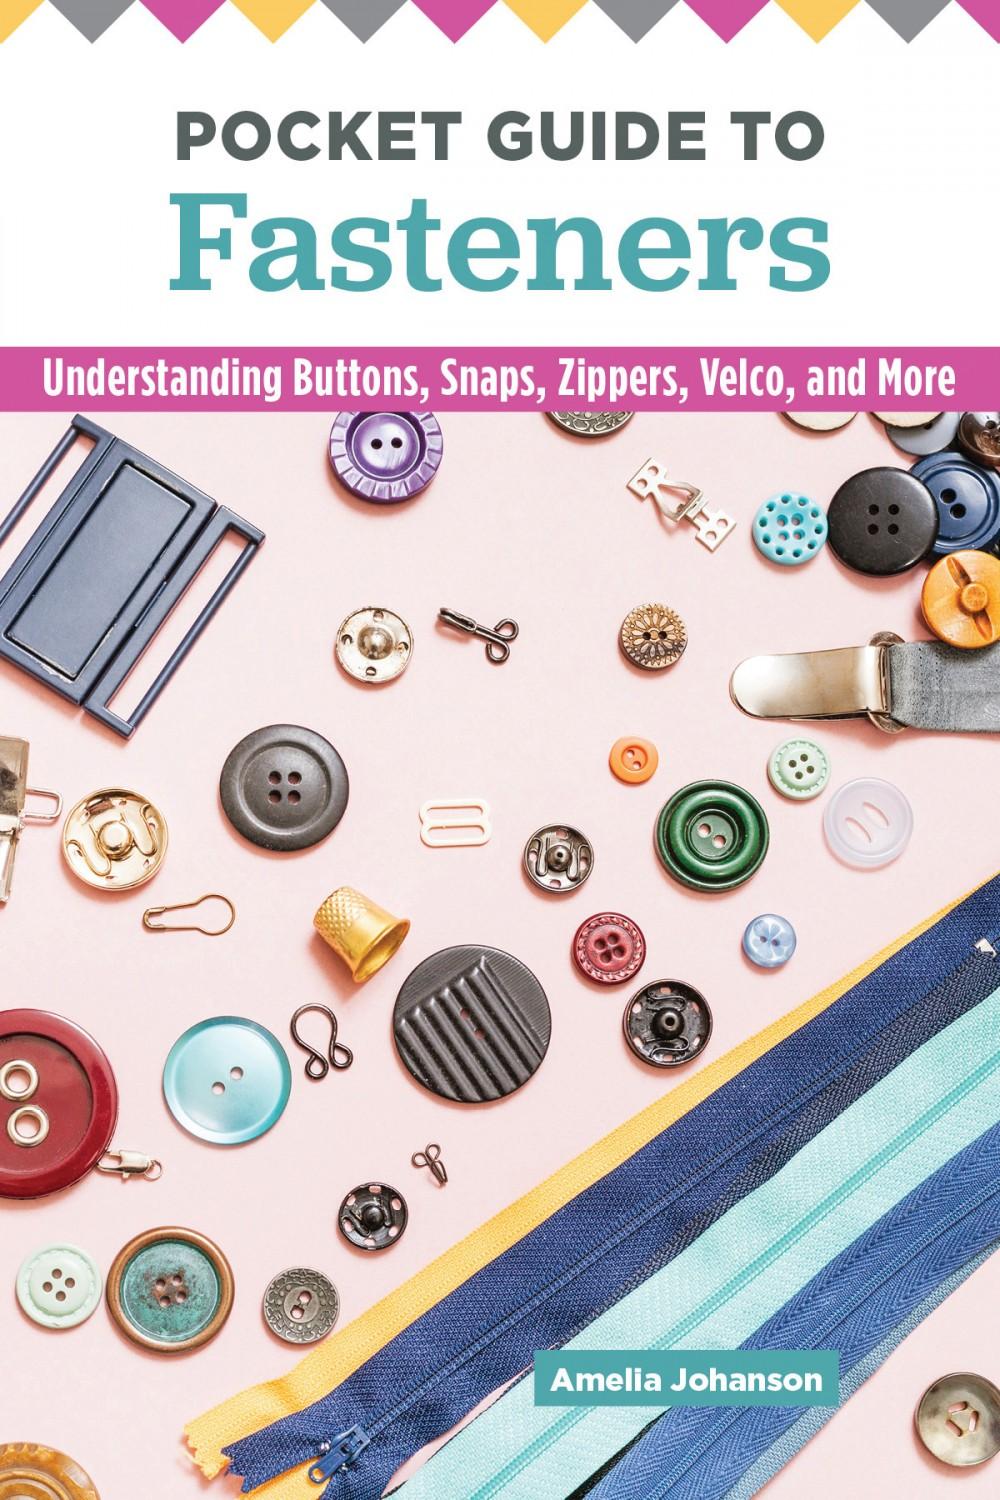 Pocket Guide to Fasteners # L812